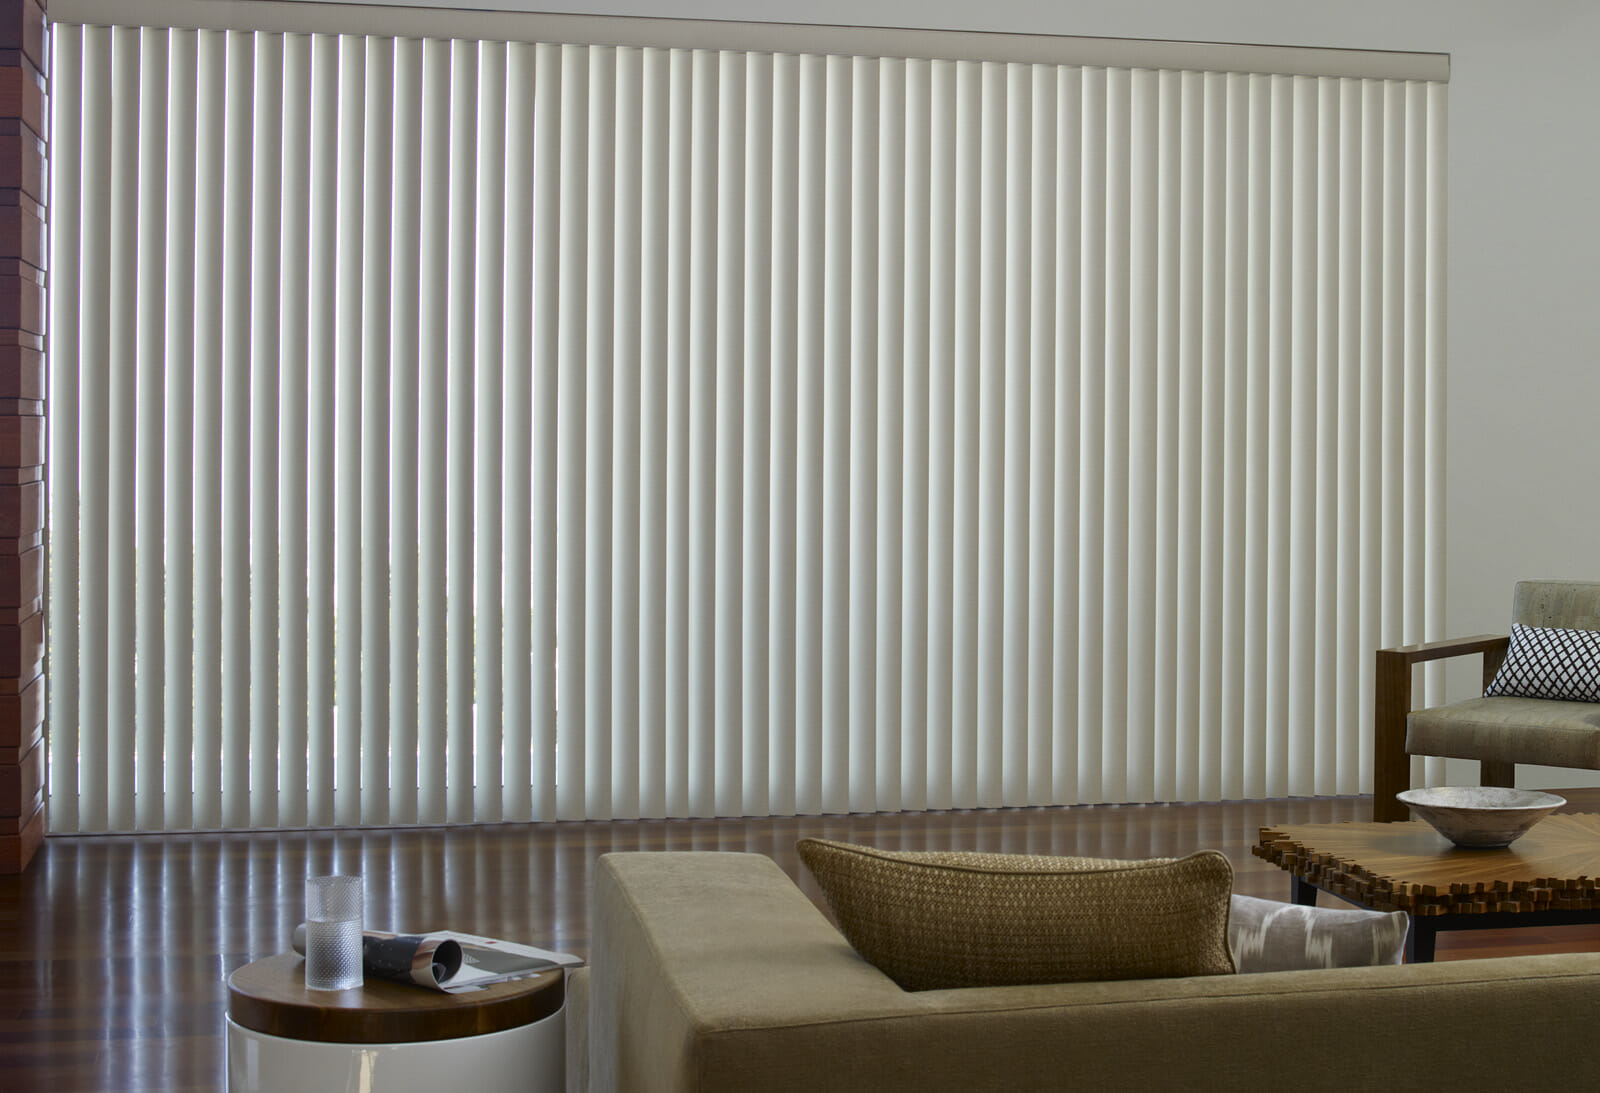 Vertical Blinds - 3 Blind Mice Window Coverings - Vertical Blinds Video & Photo Gallery